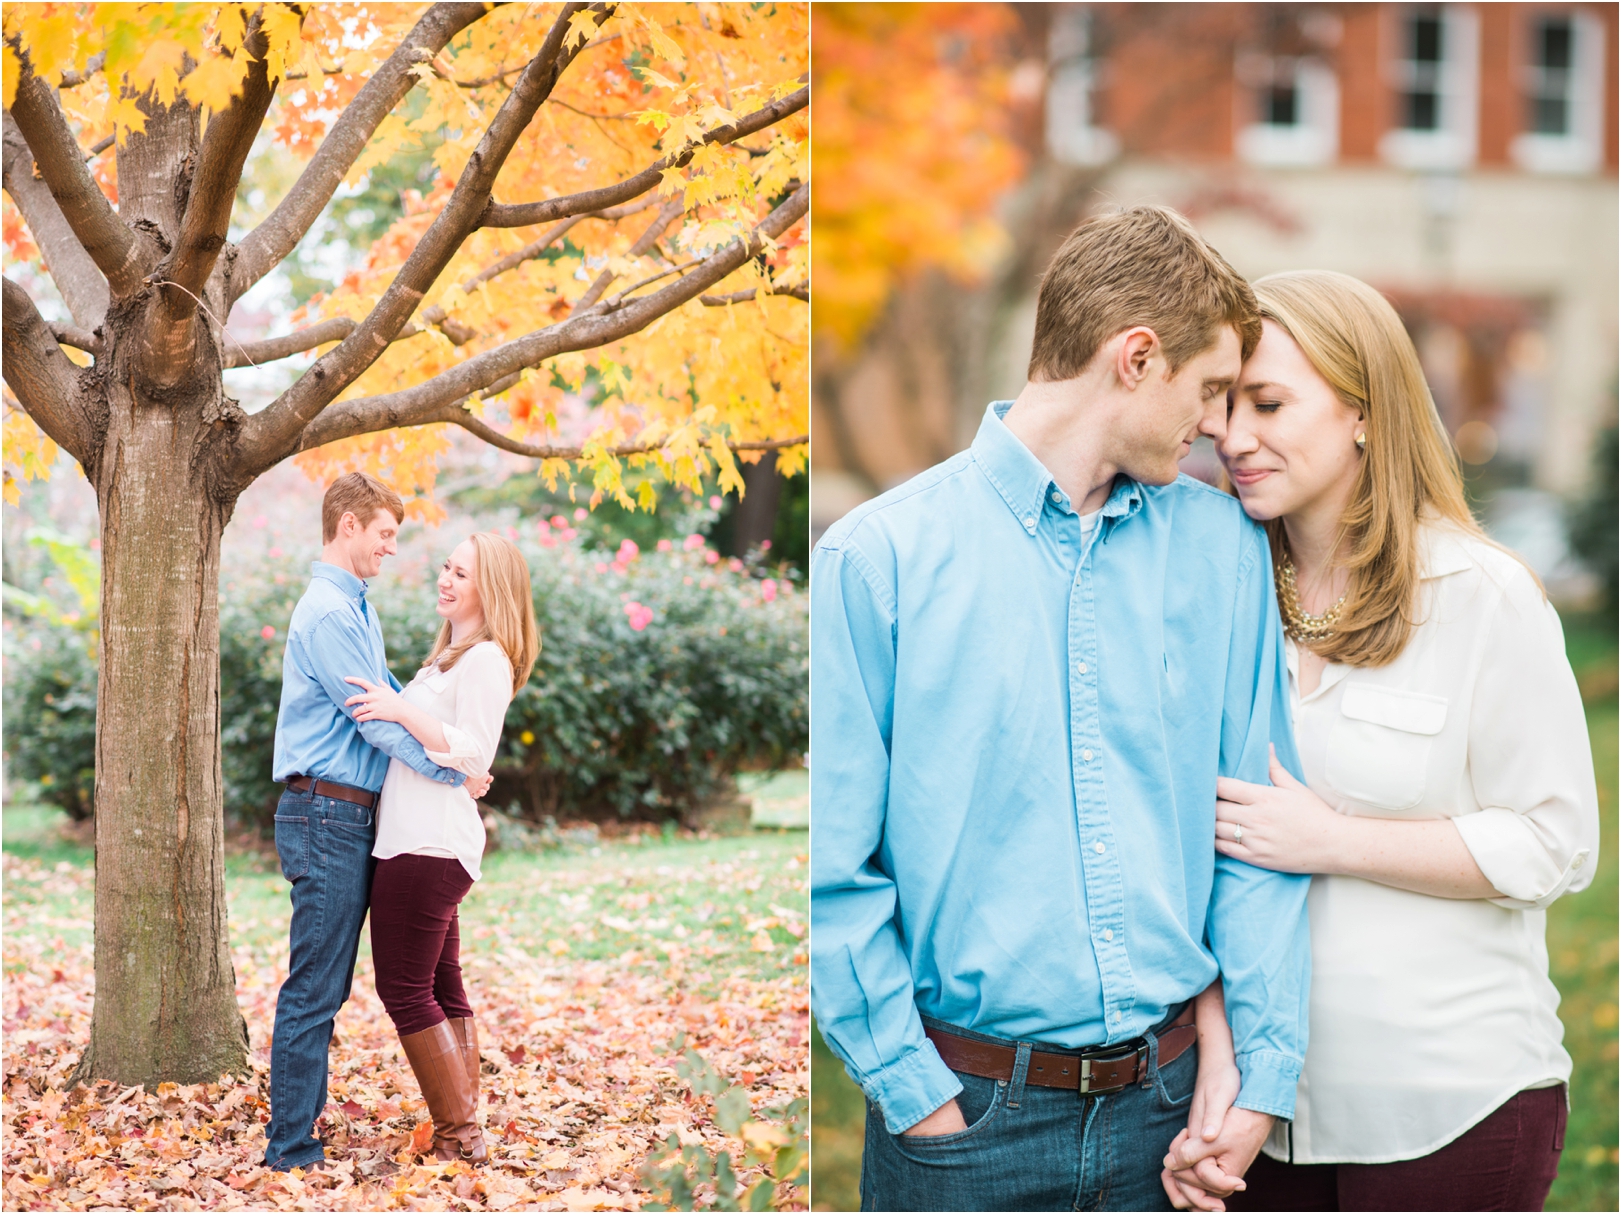 Autumn engagement session downtown Annapolis in the Fall